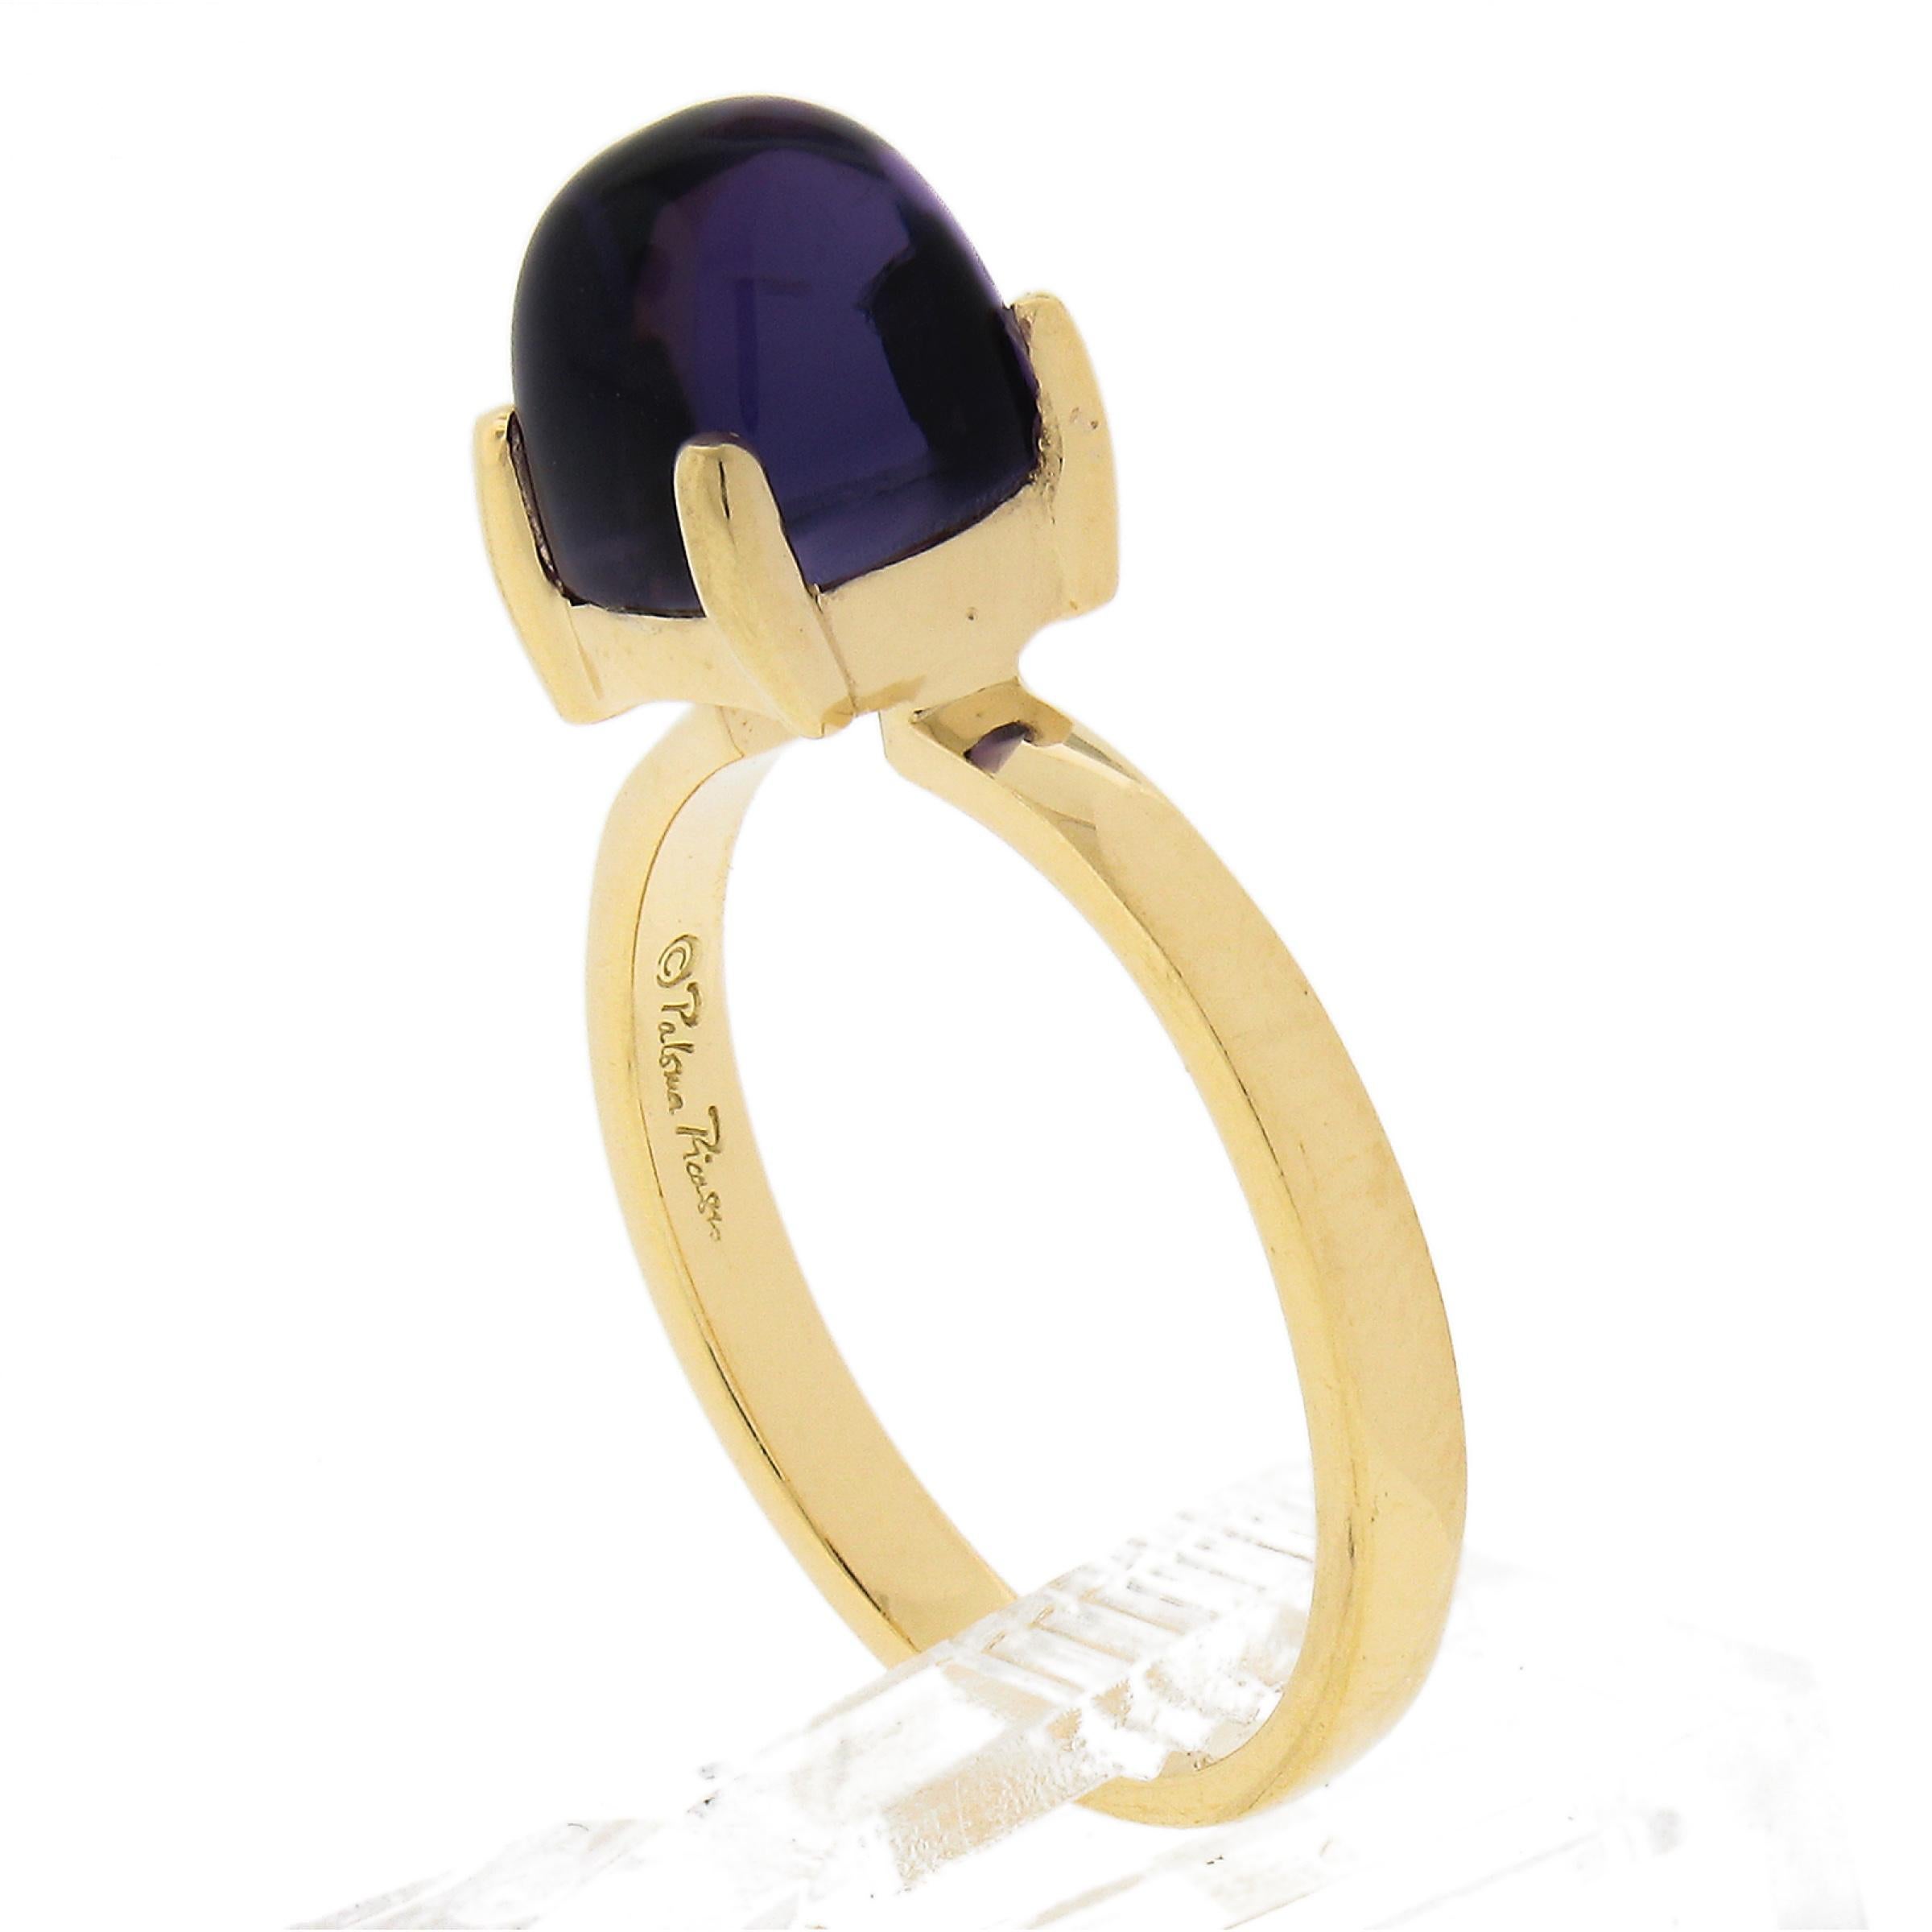 Tiffany & Co. 18k Gold Sugarloaf Cabochon Cut Amethyst Solitaire Cocktail Ring 4